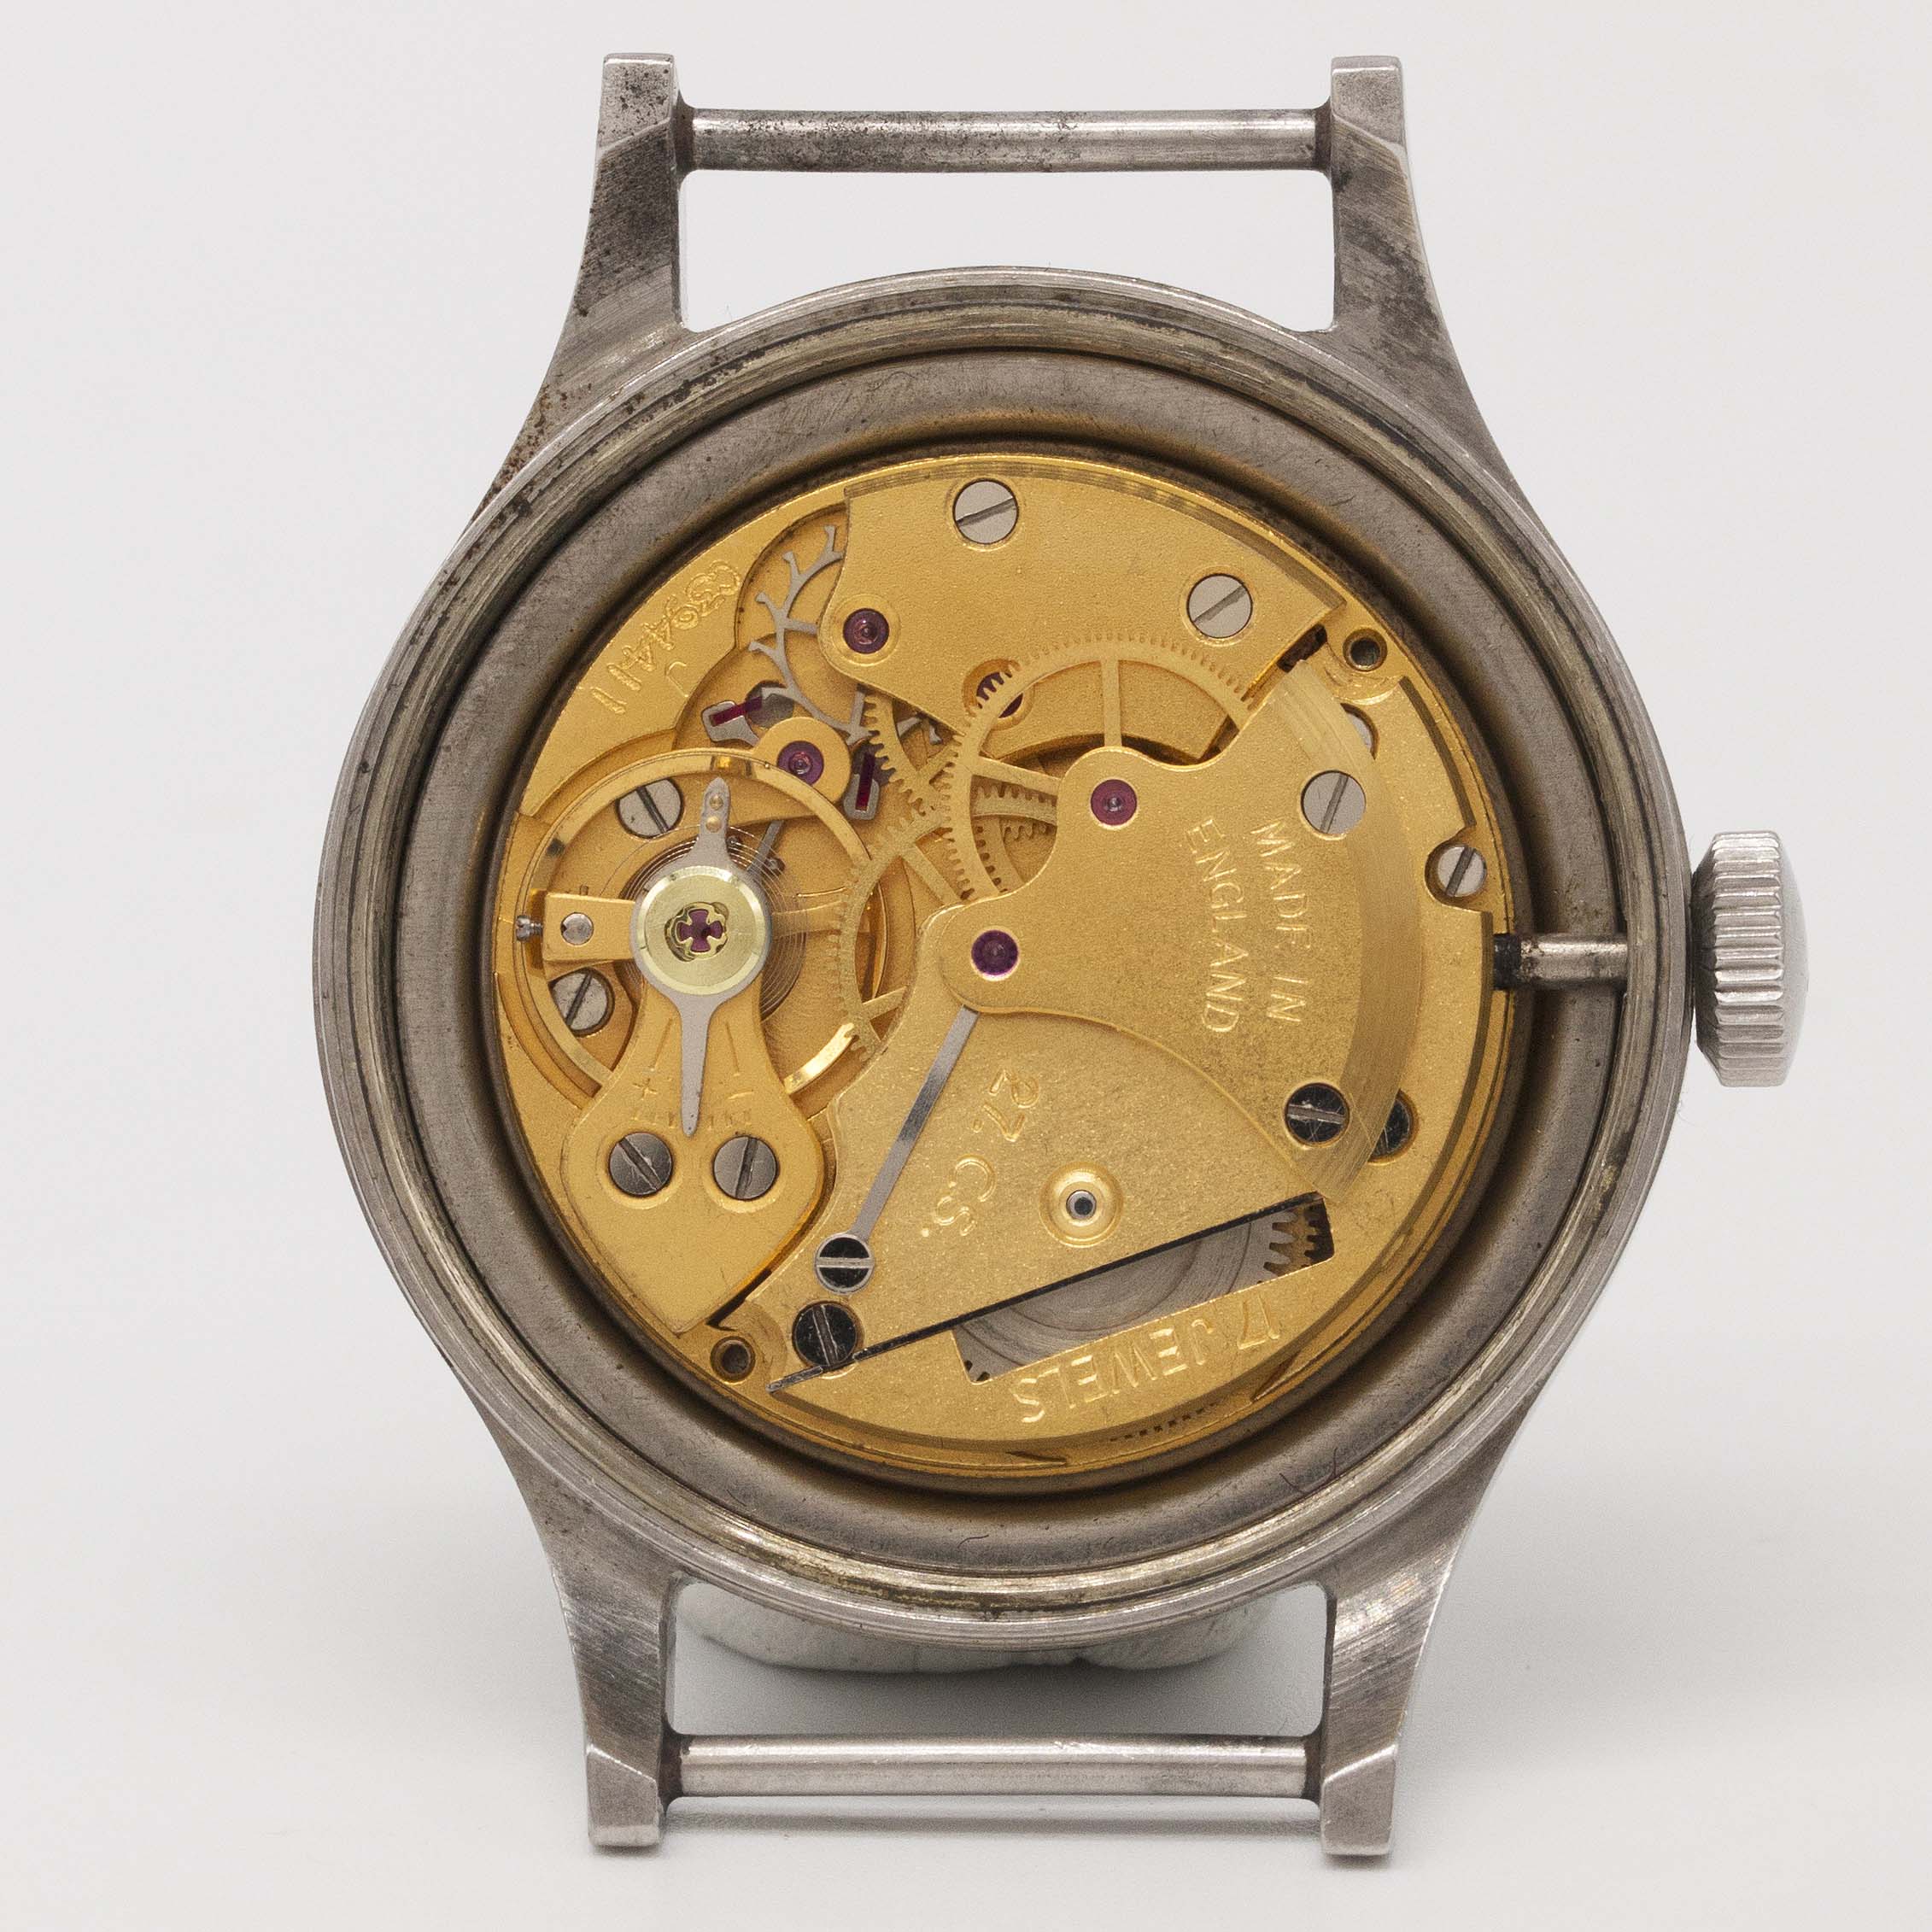 A VERY RARE GENTLEMAN'S STAINLESS STEEL AUSTRALIAN MILITARY SMITHS DE LUXE WRIST WATCH DATED 1961, - Image 8 of 11